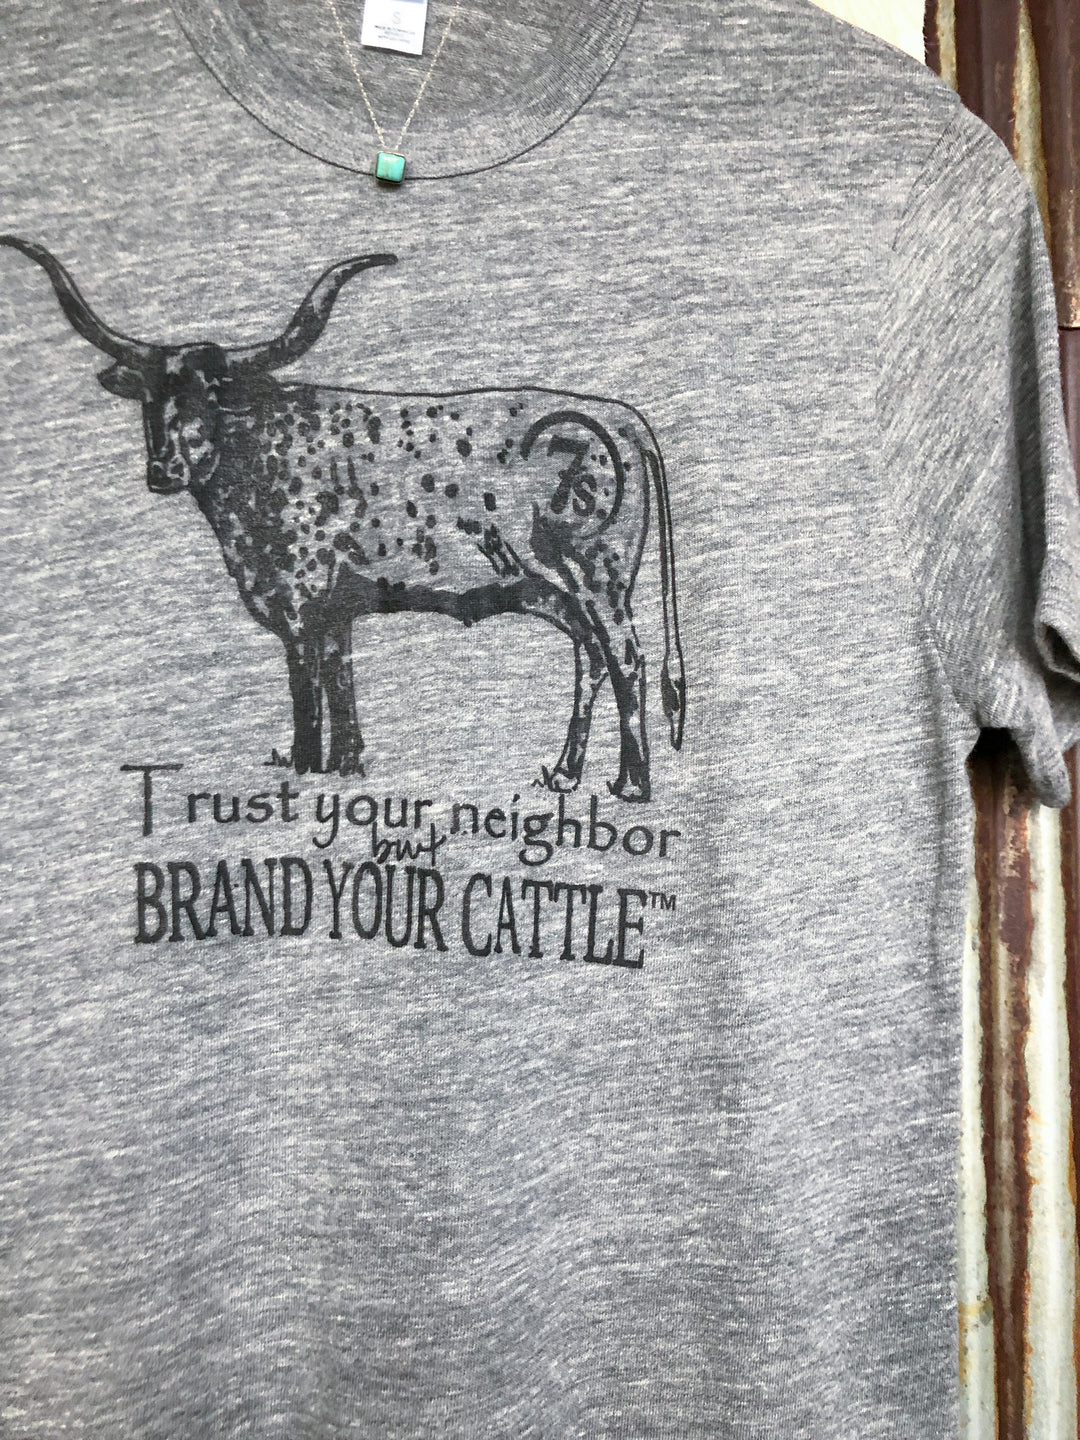 The Brand Your Cattle